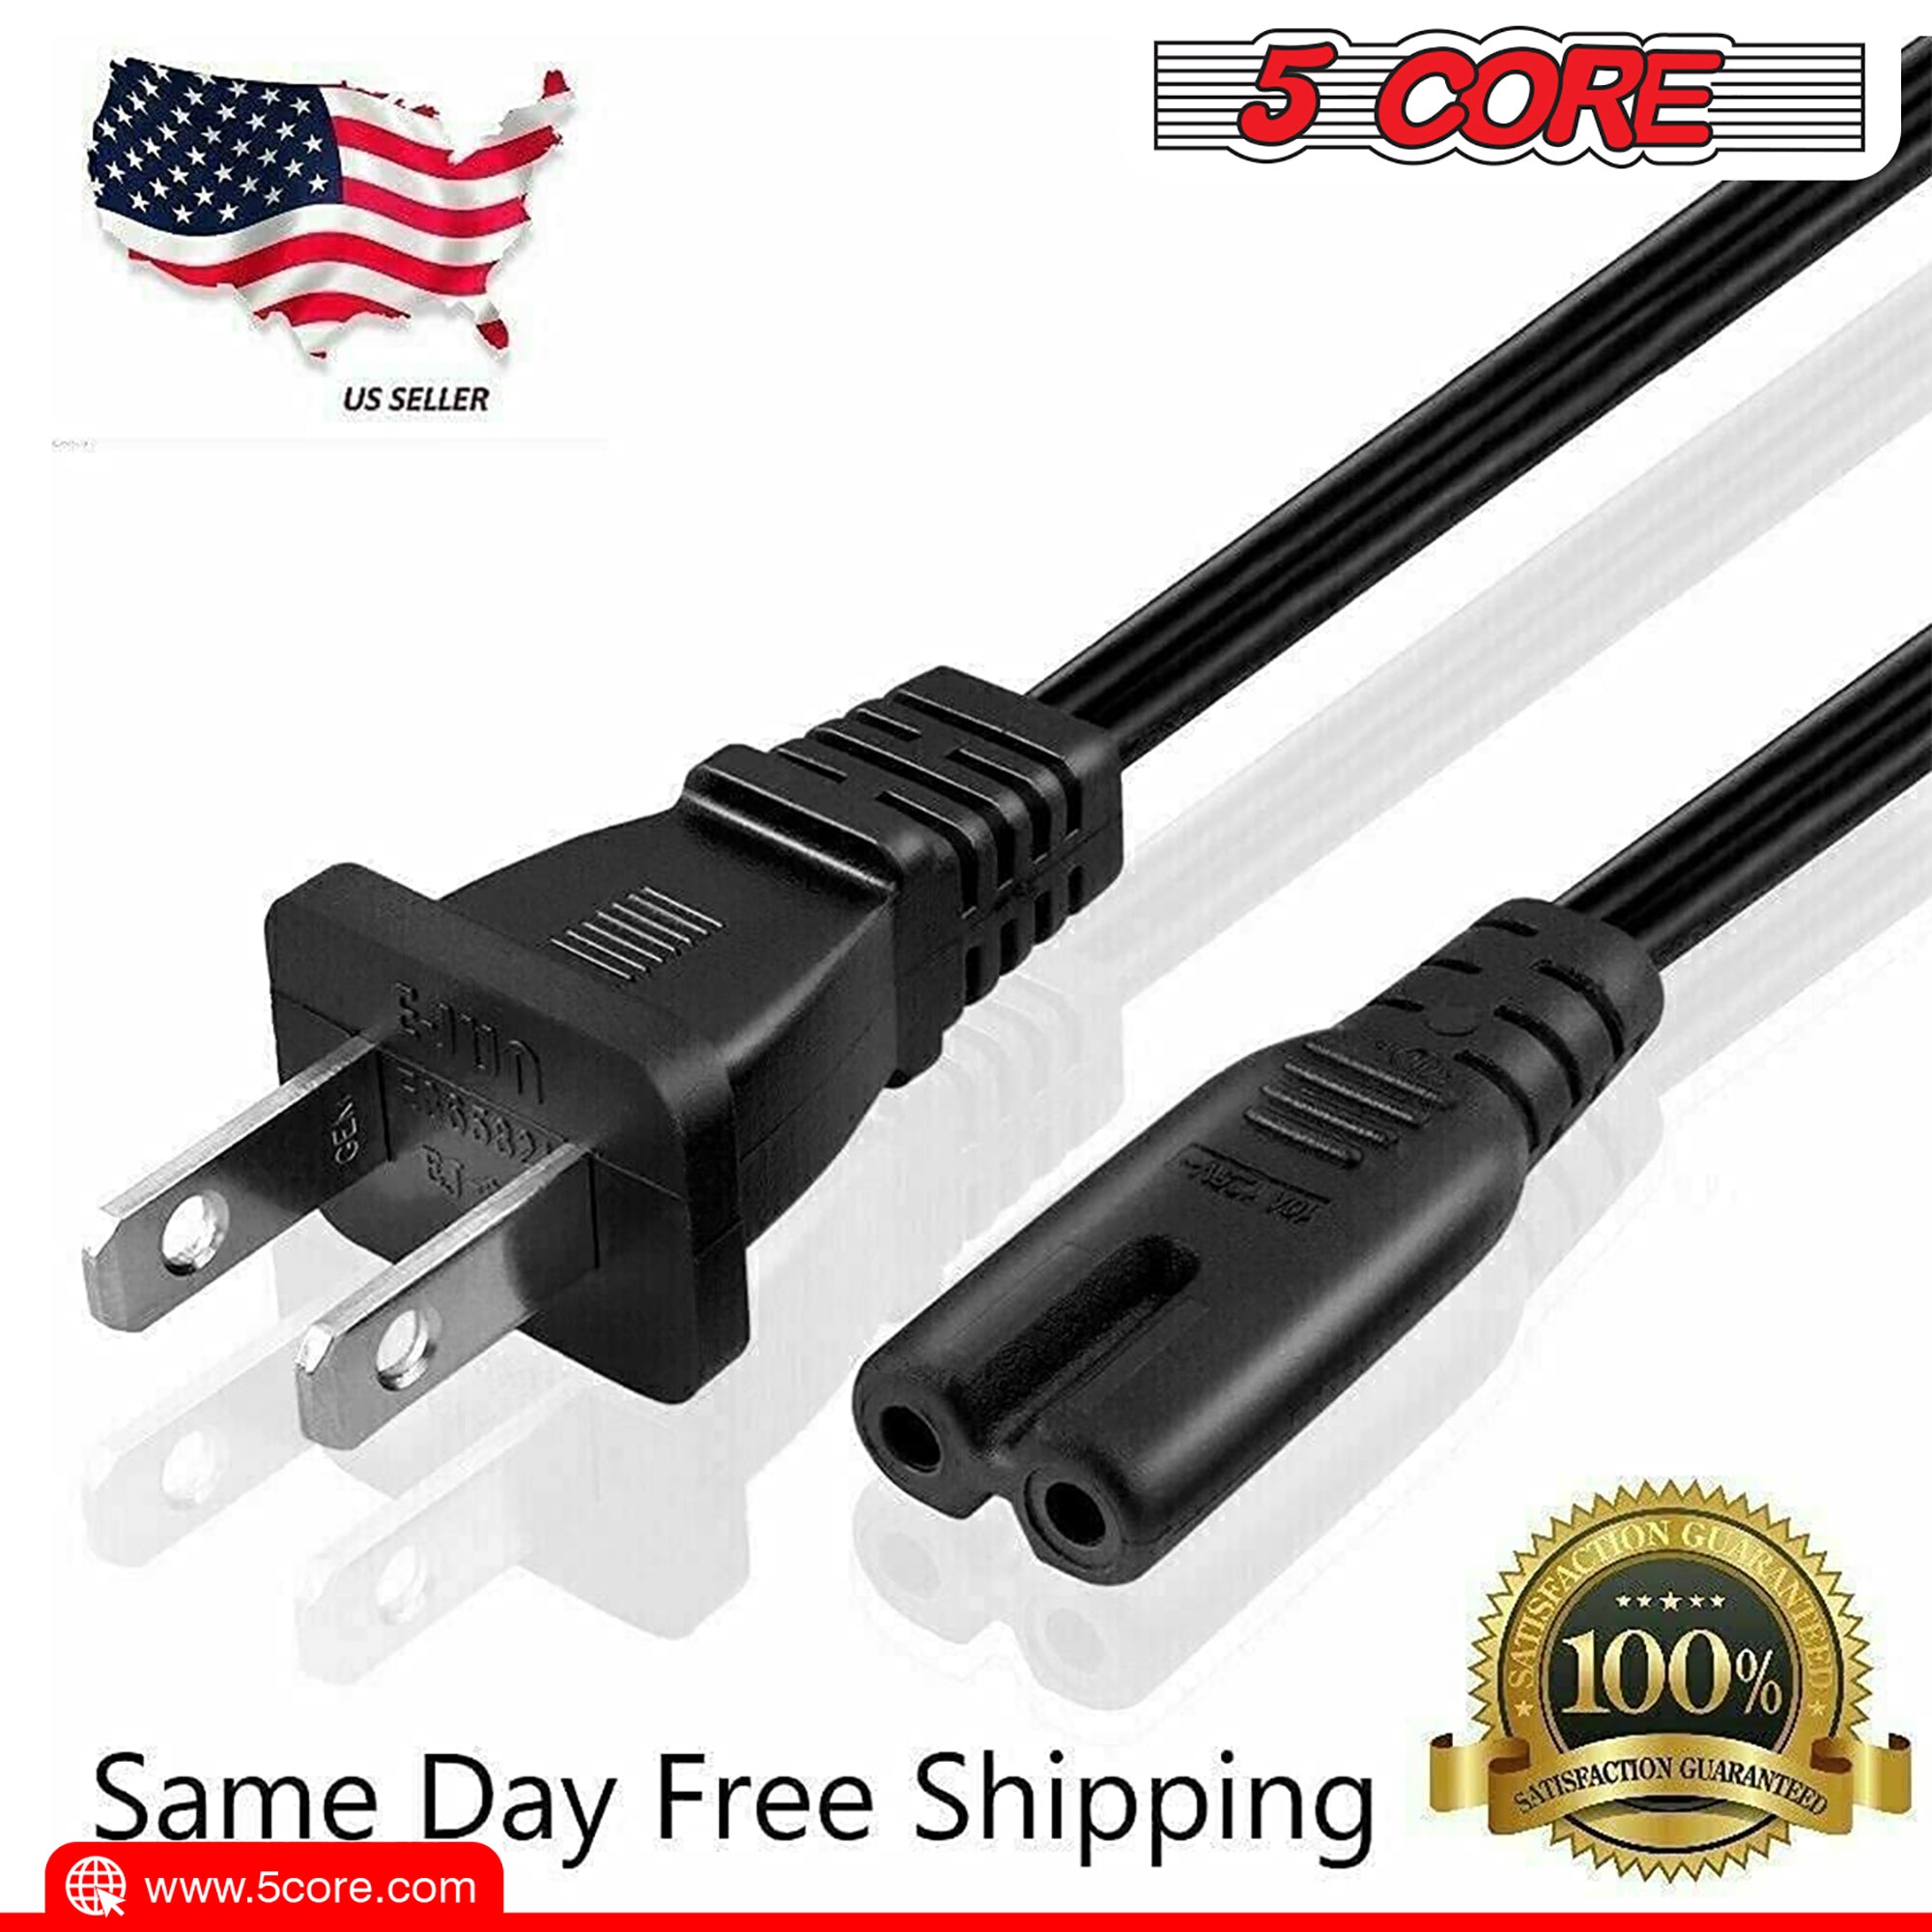 5 Core AC Power Cord 12 Ft • 2 Prong US Male to Female Extension Adapter • 16AWG/2C 125V 13A